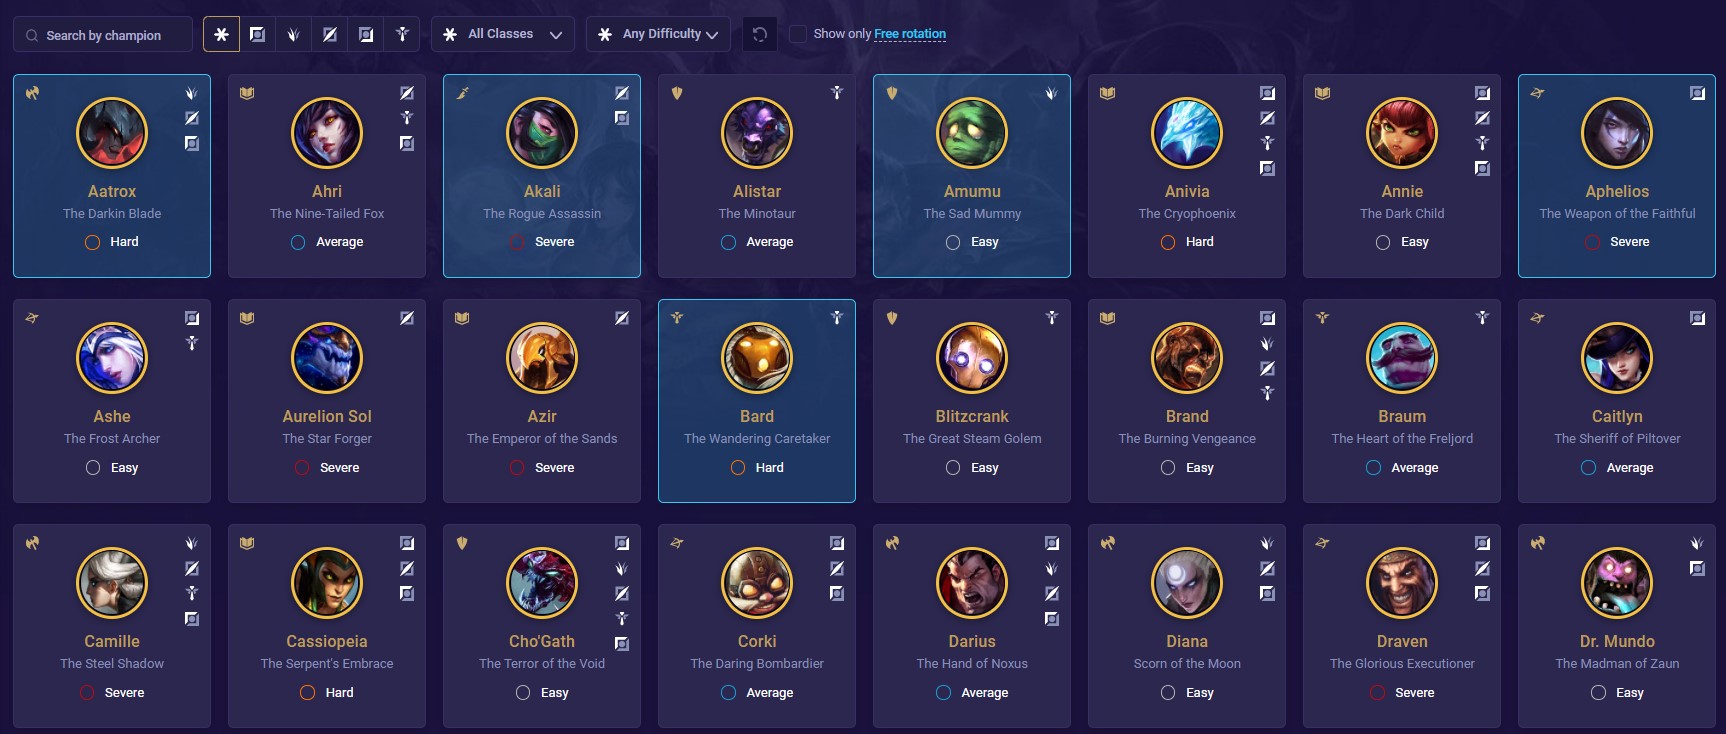 Champion pages example (LoL)